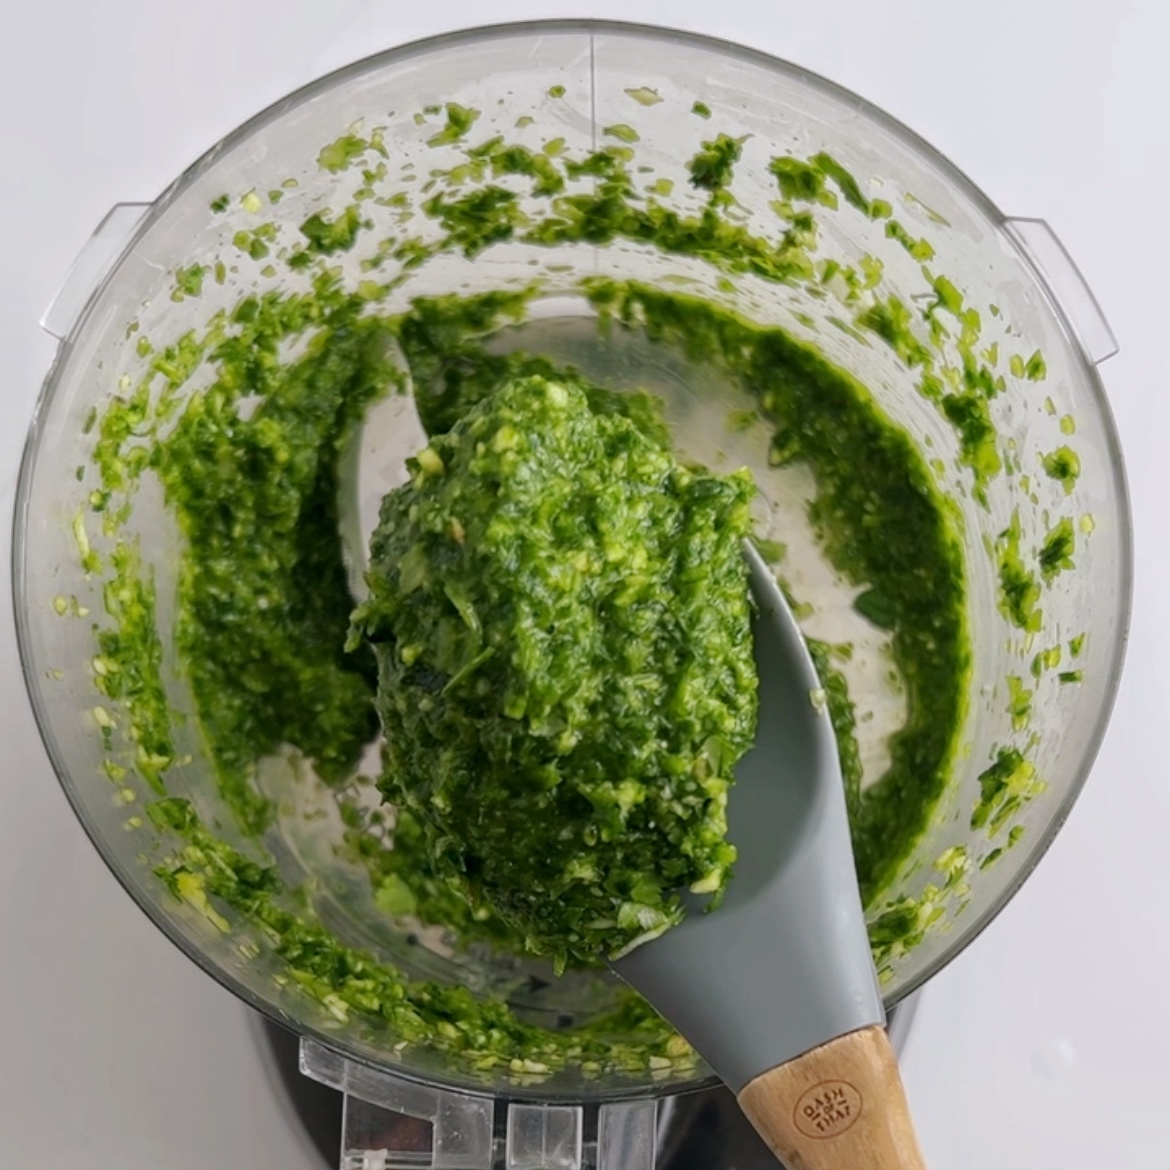 Blending aromatics and herbs in a food processor.